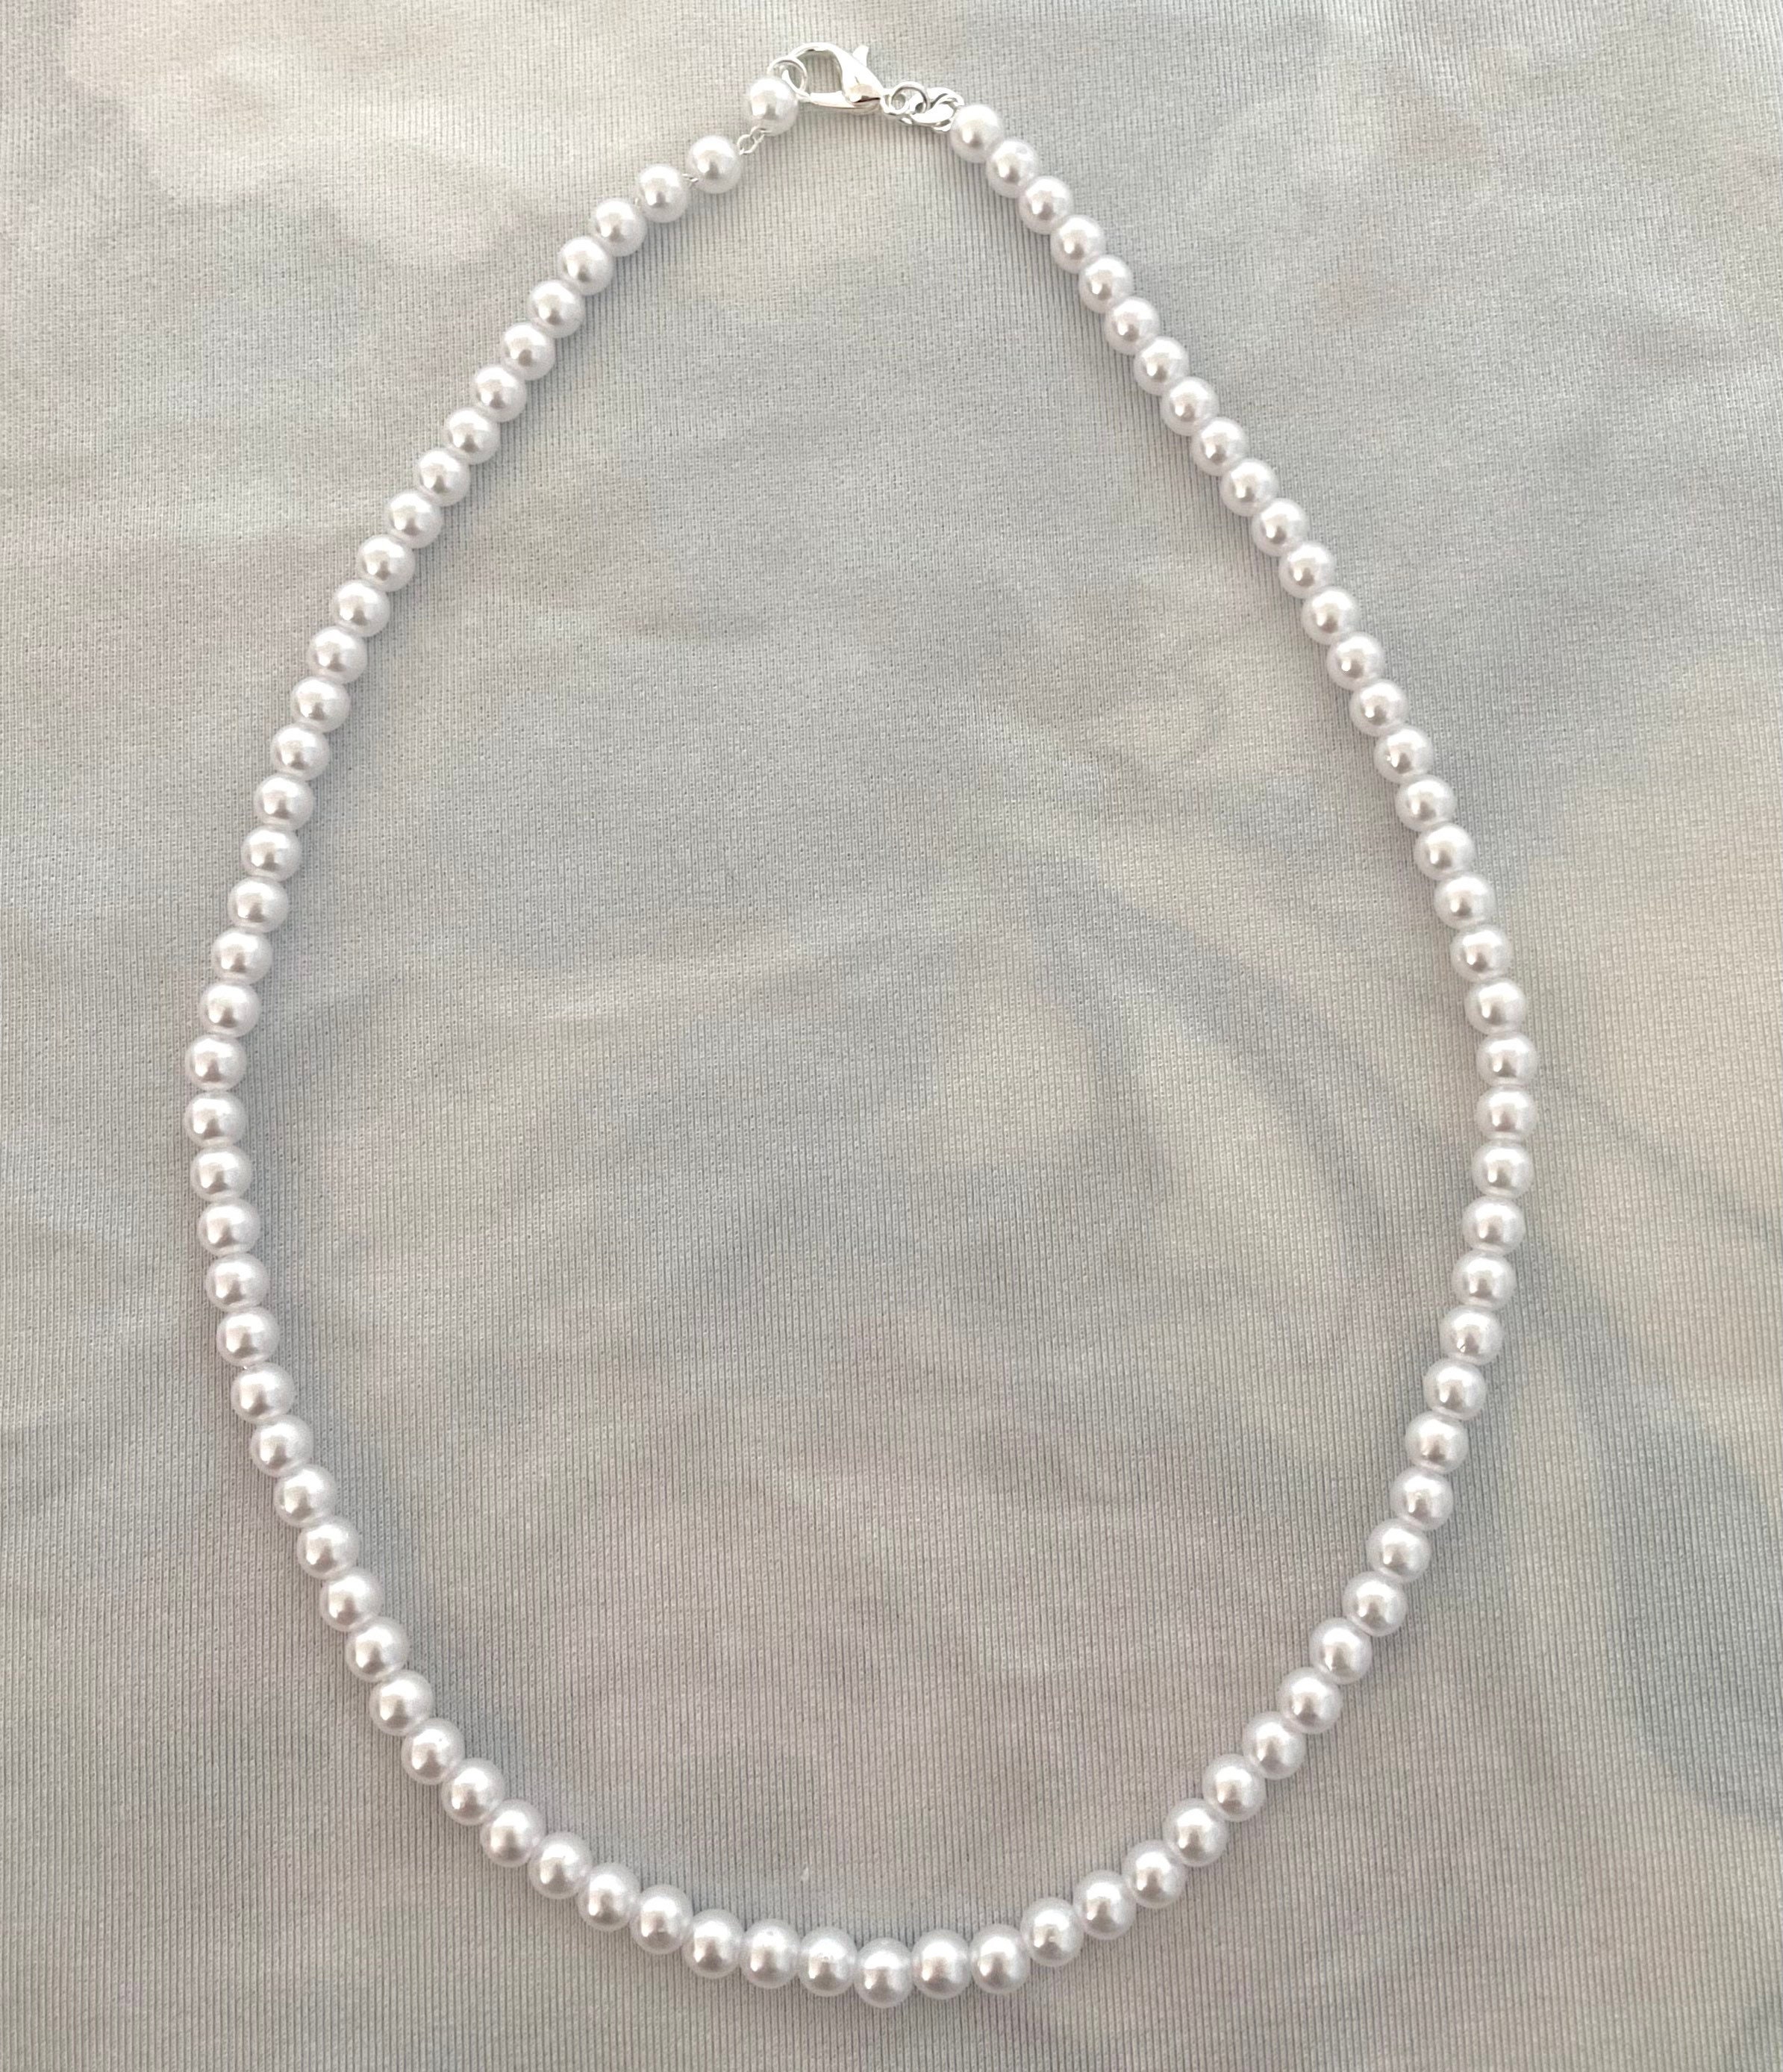 Simple 5mm White Pearl Necklace Harry Styles Inspired 16 or 18 - Etsy UK